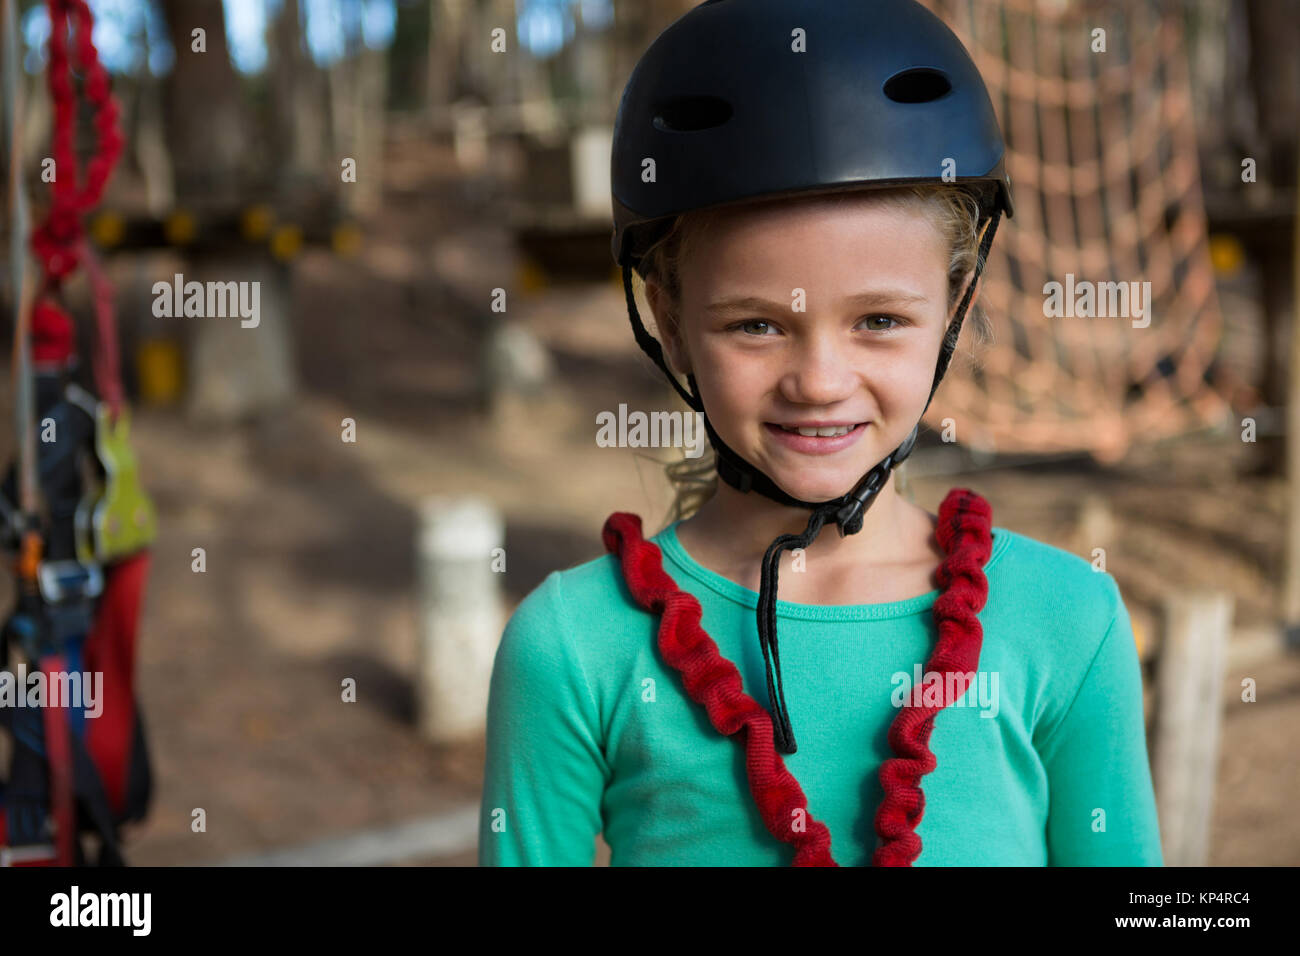 Close-up portrait of little girl wearing helmet and harness Stock Photo